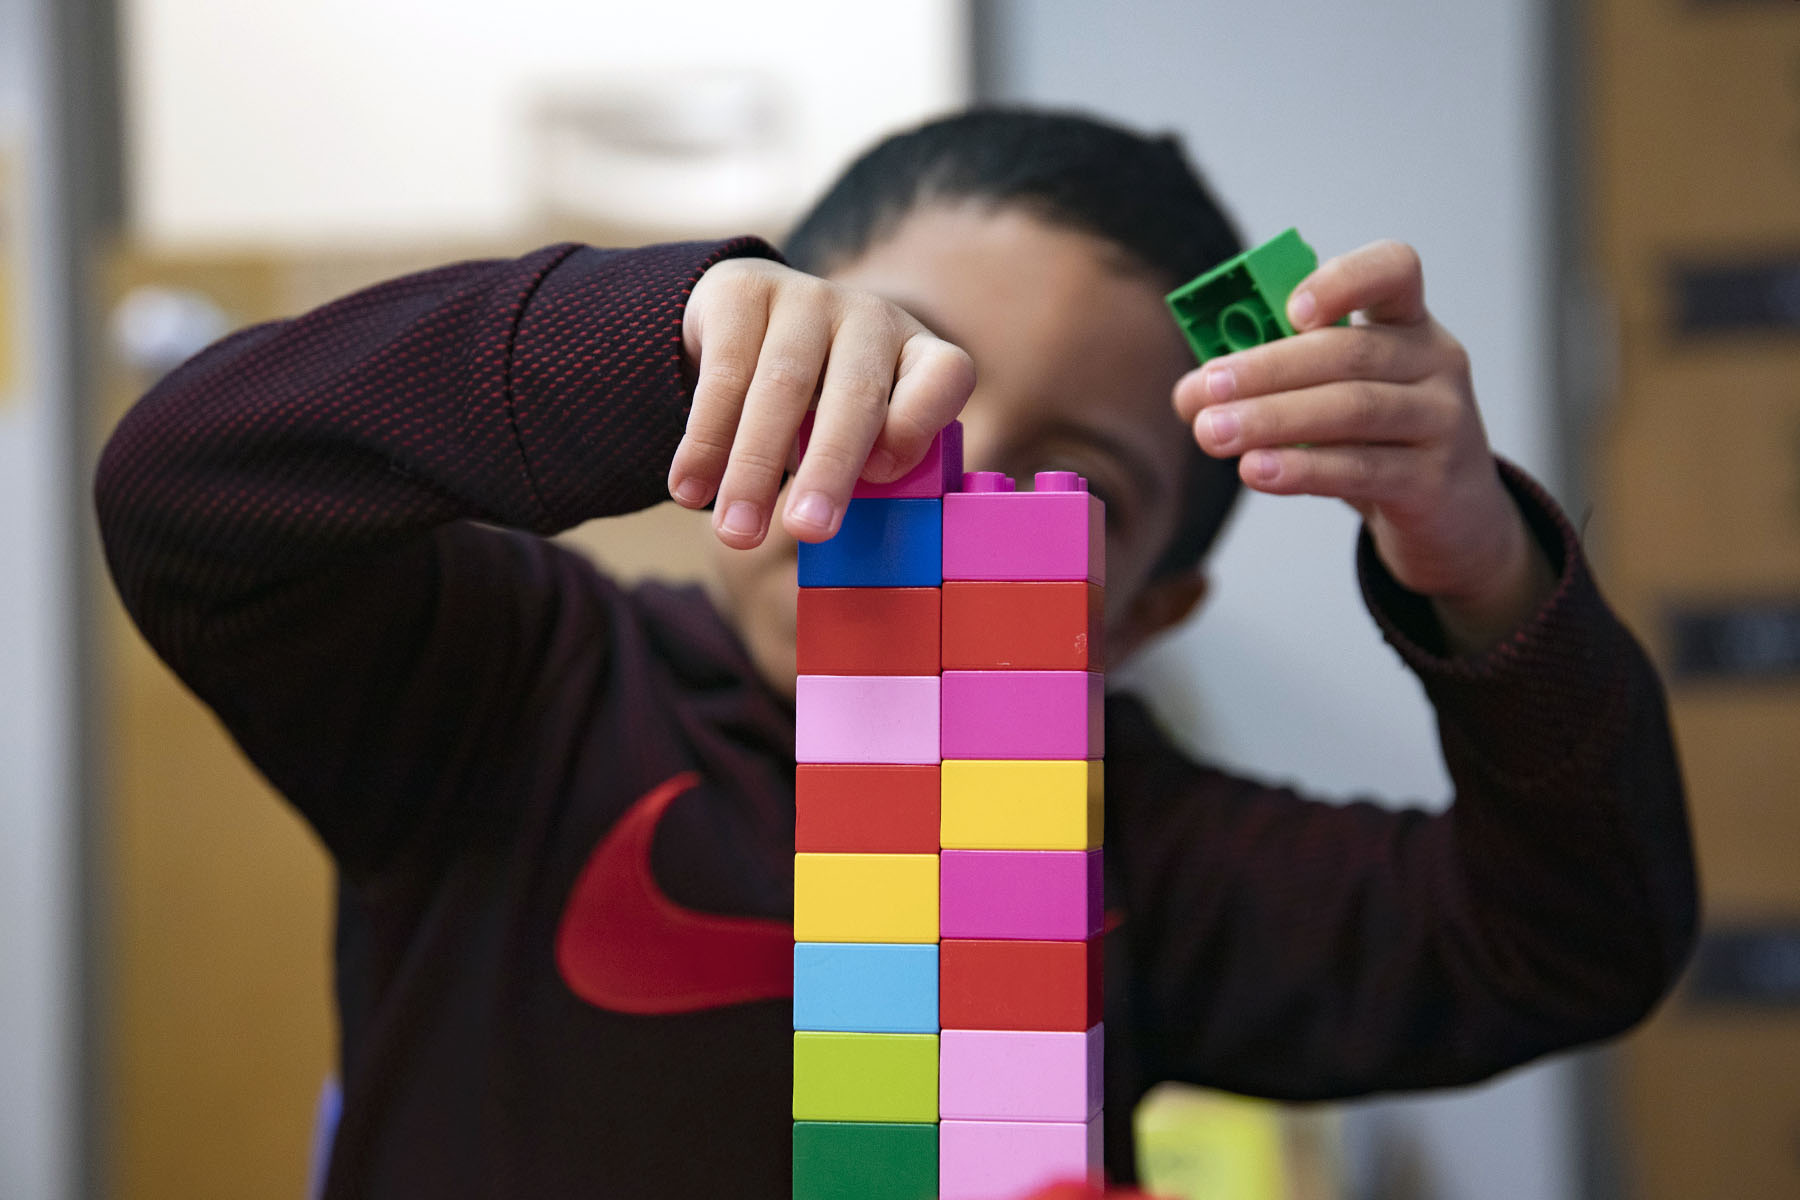 A child plays with a lego set at a daycare.